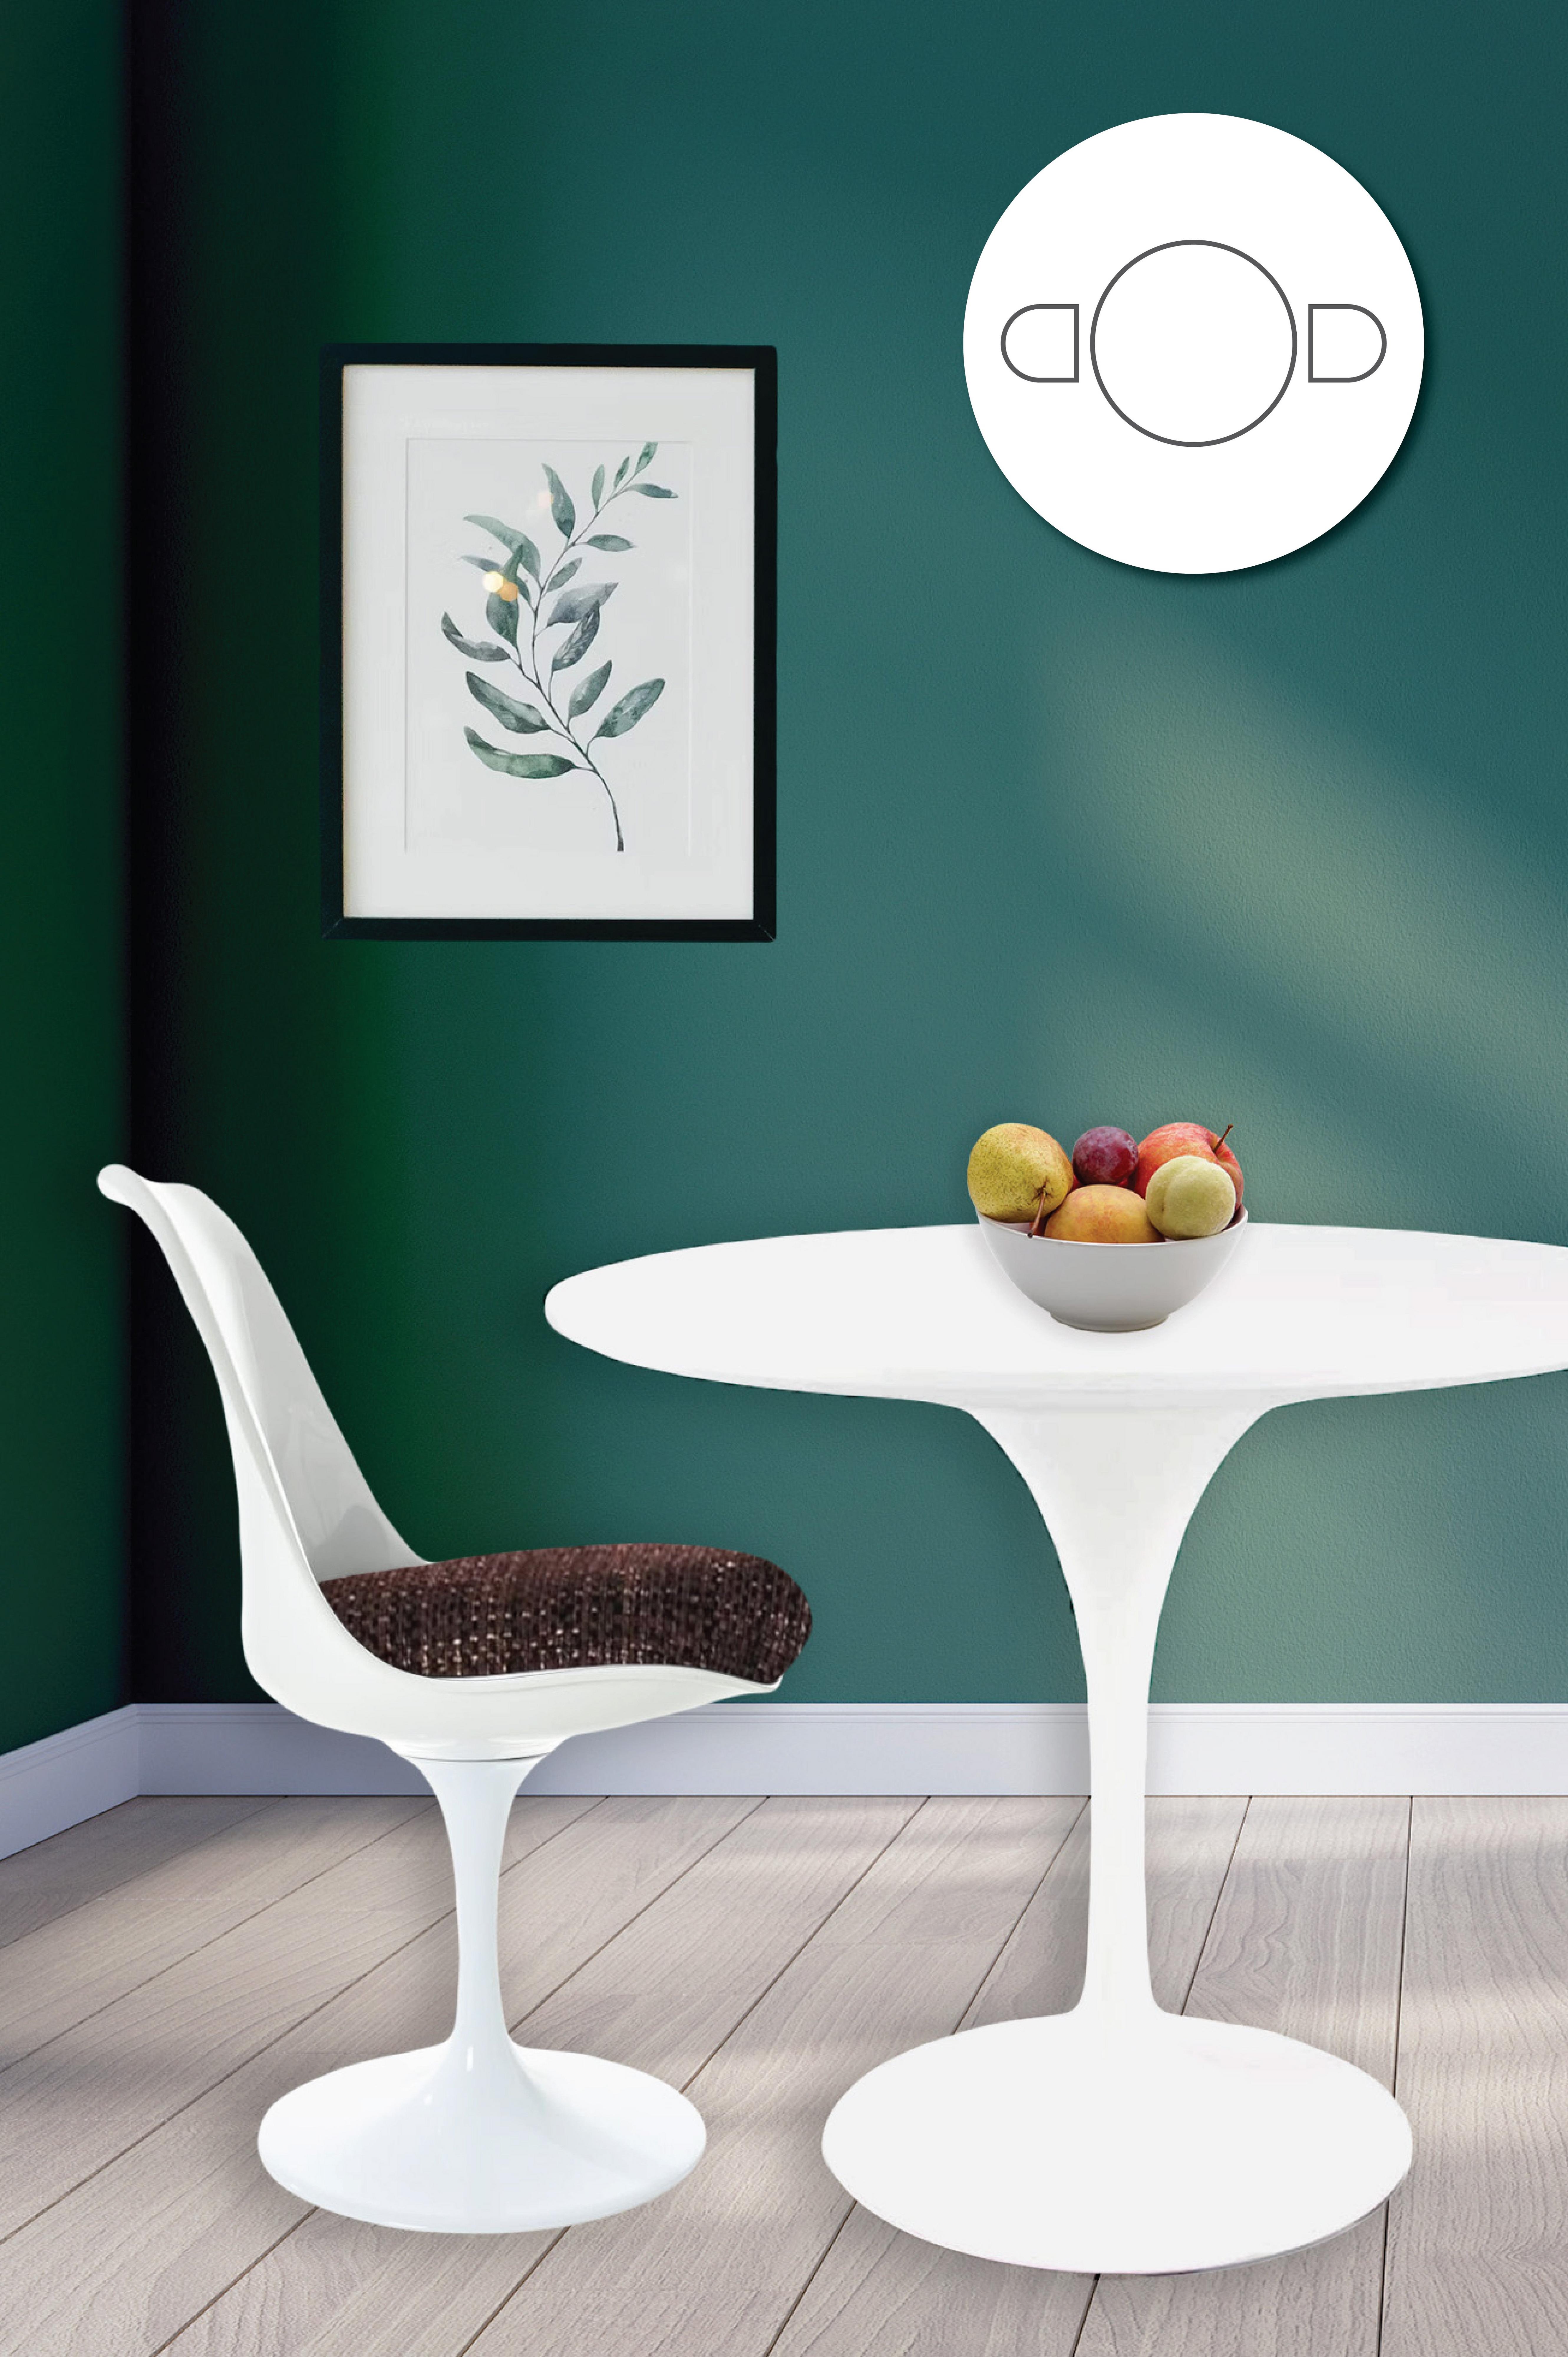 Tulip Set - White Medium Circular Table and Two Chairs with Textured Cushion